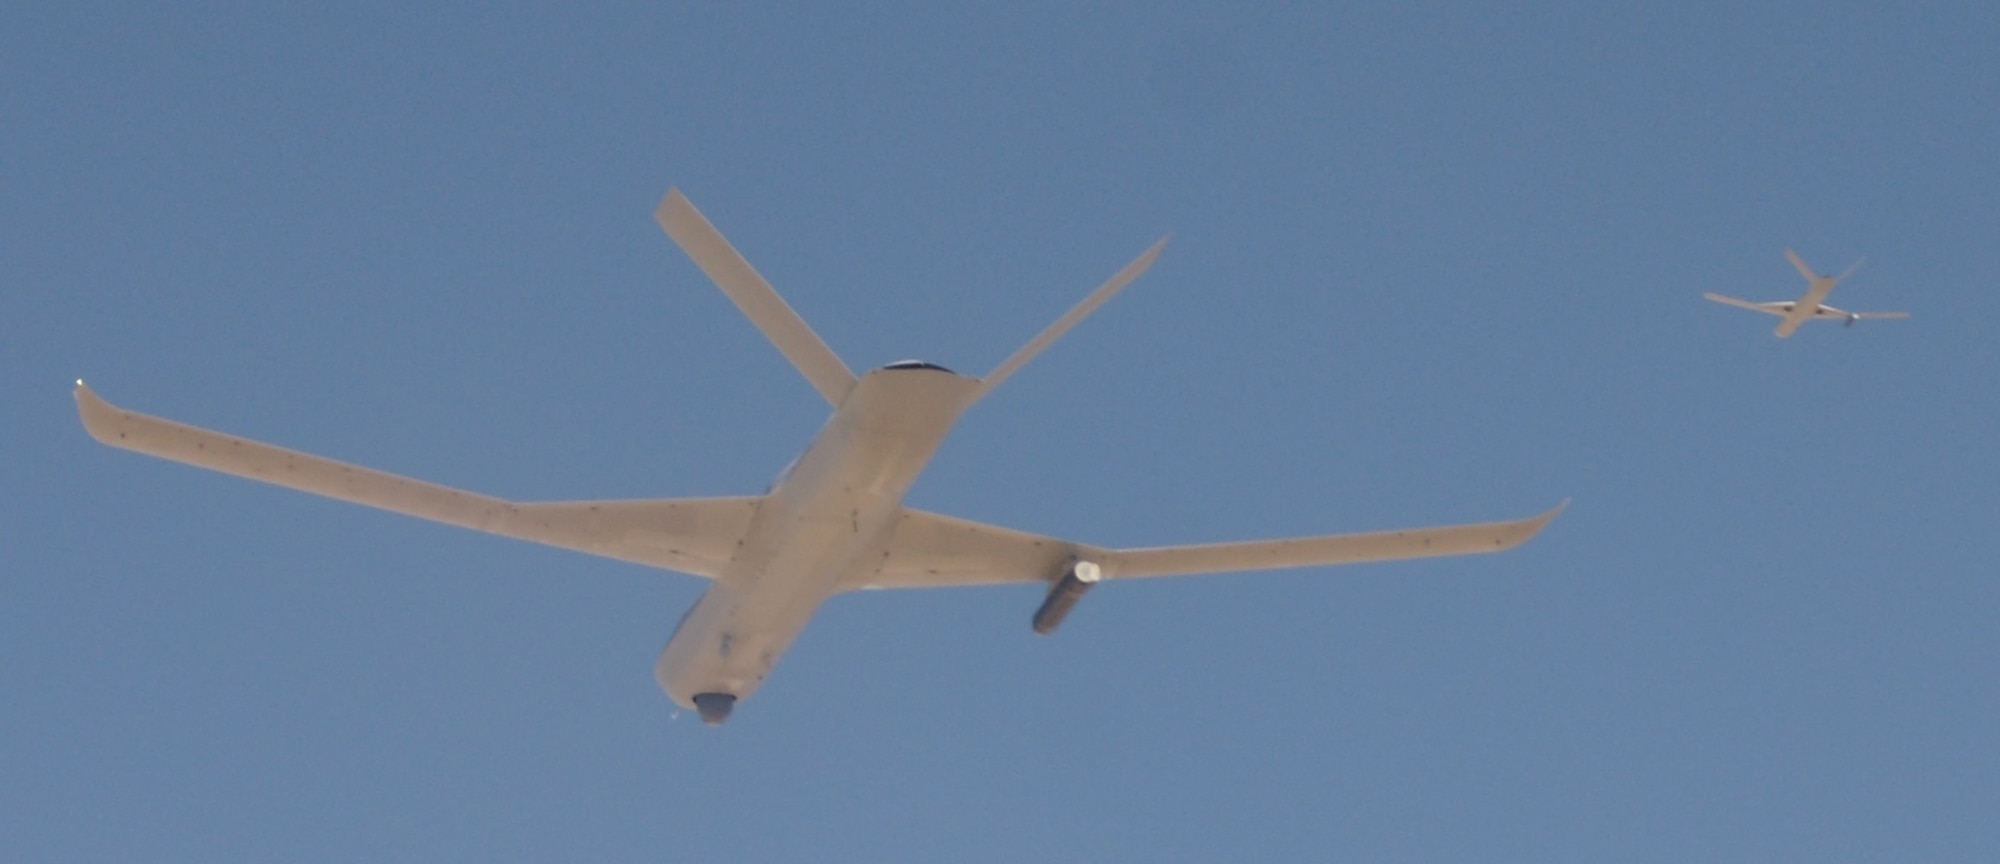 Two General Atomics MQ-20 Avengers fly collaborative unmanned aircraft teaming experiments during Edwards Air Force Base’s Orange Flag 21-3 (Photo courtesy of General Atomics)